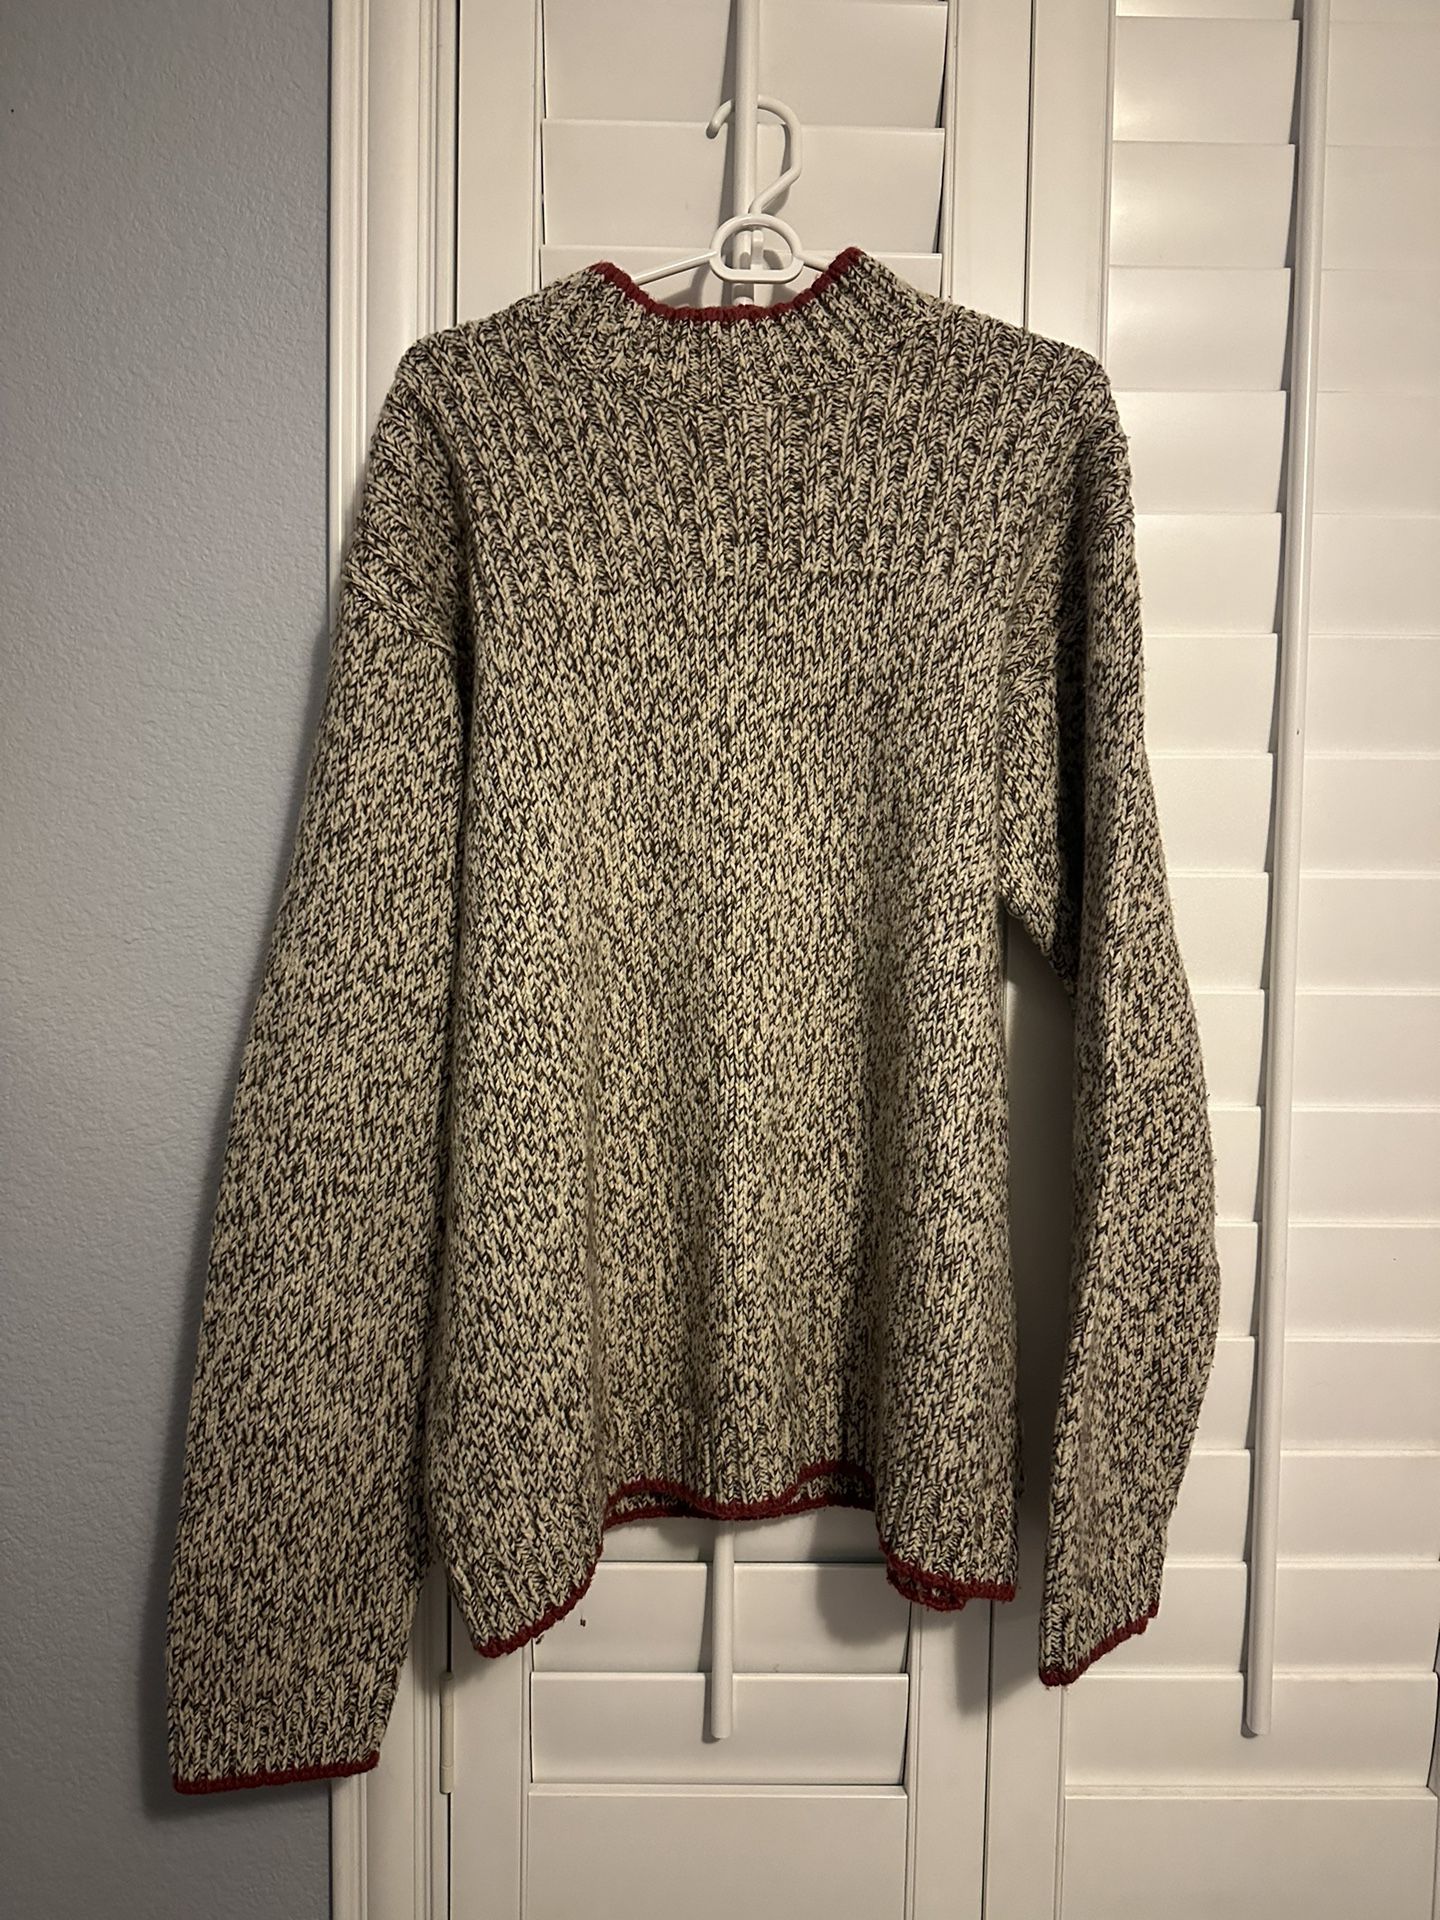 VTG 90s NWOT TIMBERLAND BEIGE/RED WOOL SOFT KNITWEAR SWEATER SIZE XL